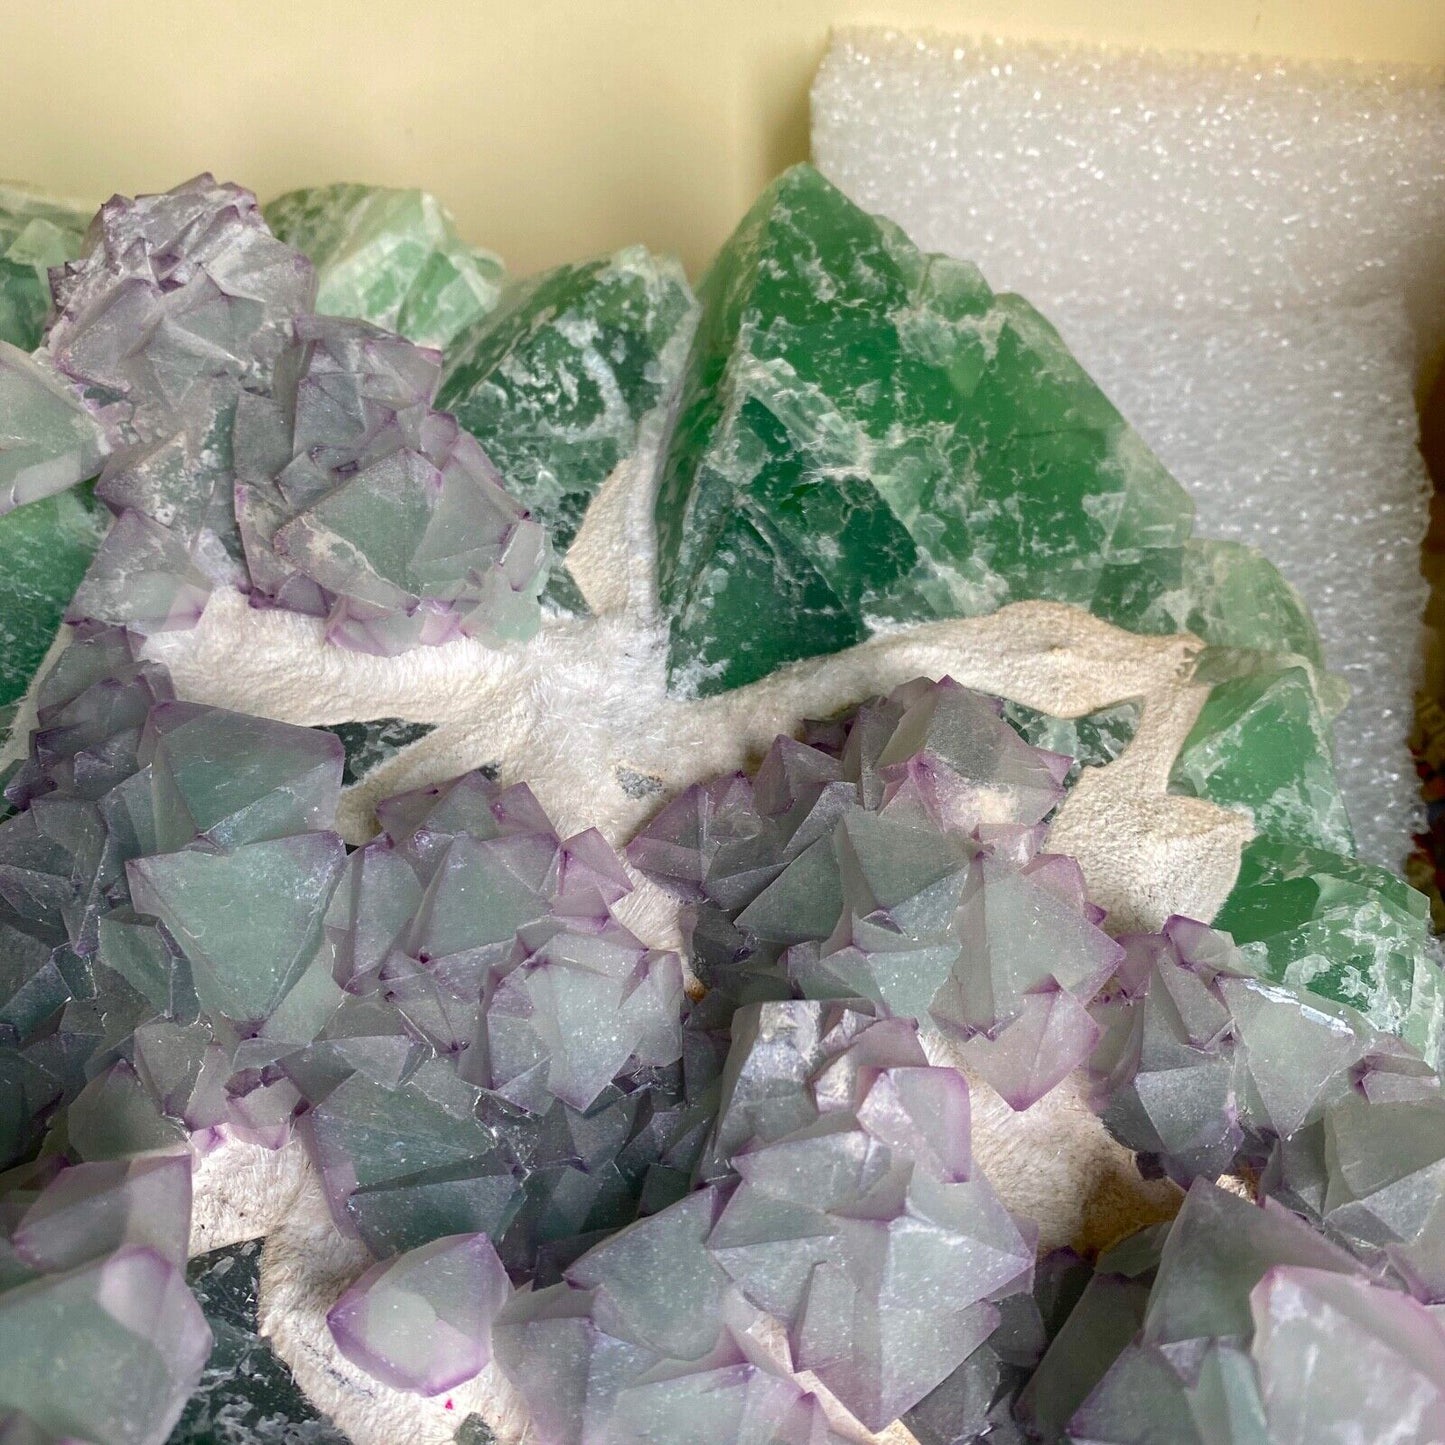 FLUORITE SPECTACULAR CRYSTAL ASSEMBLAGE FROM DE'AN MINE, CHINA 15kg MF6700